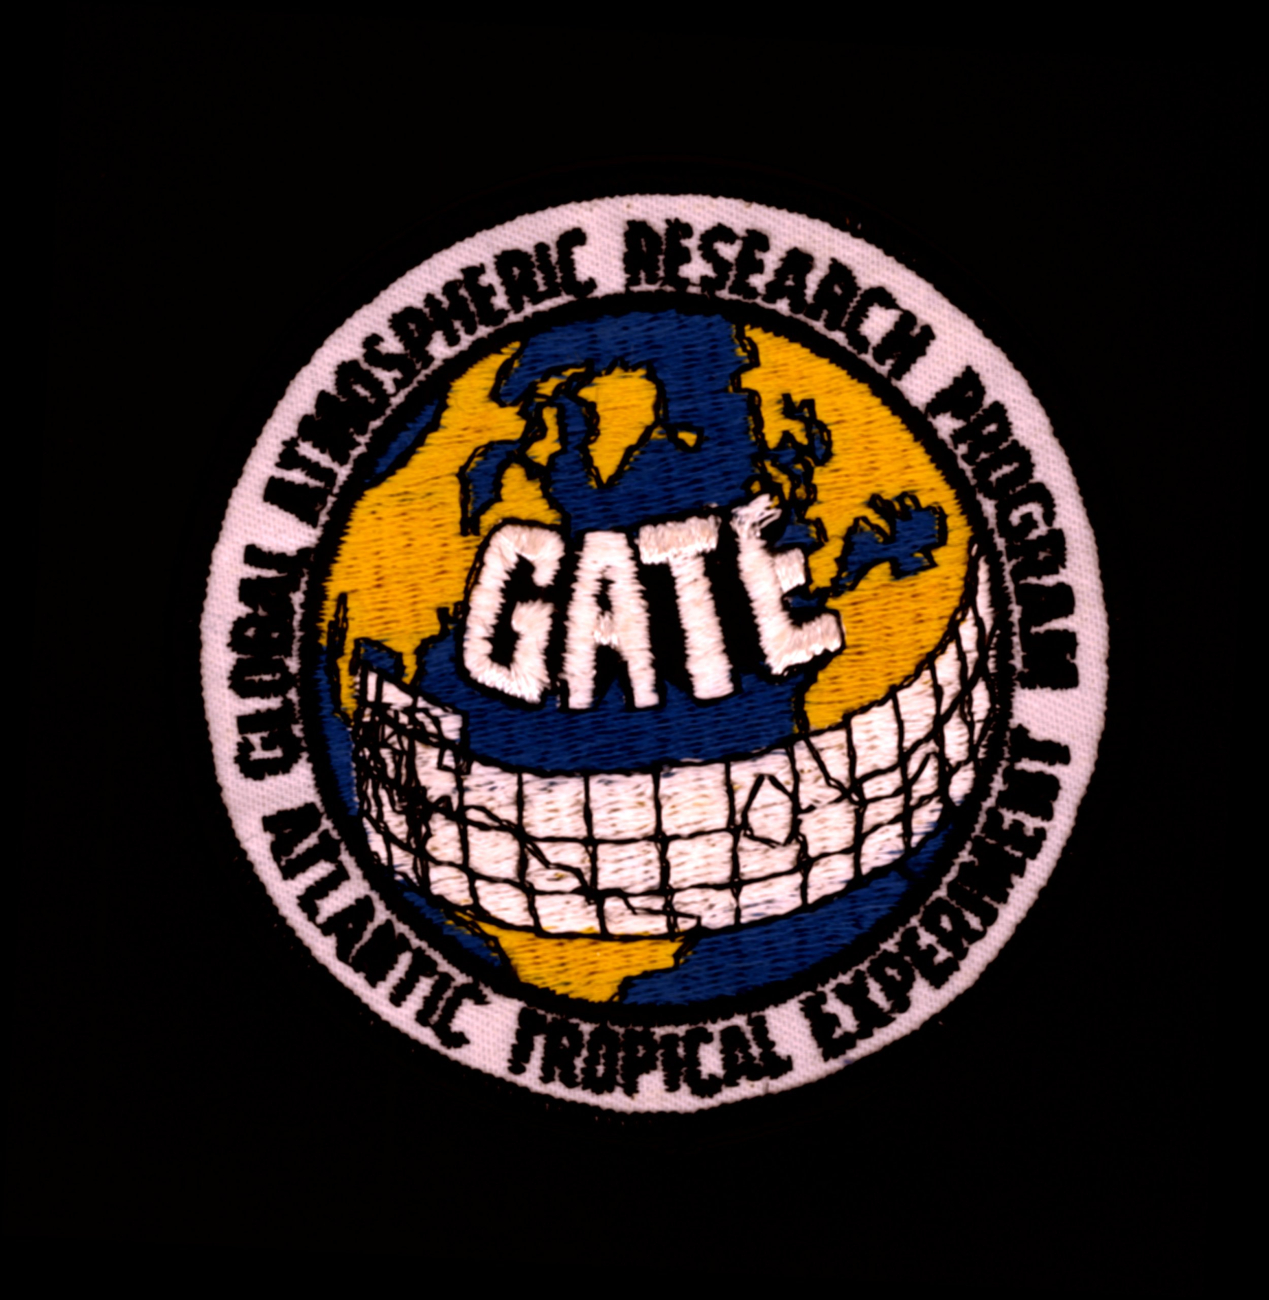 Patch commemorating the Global Atmospheric Research Program Atlantic TropicalExperiment, an early 1970's project